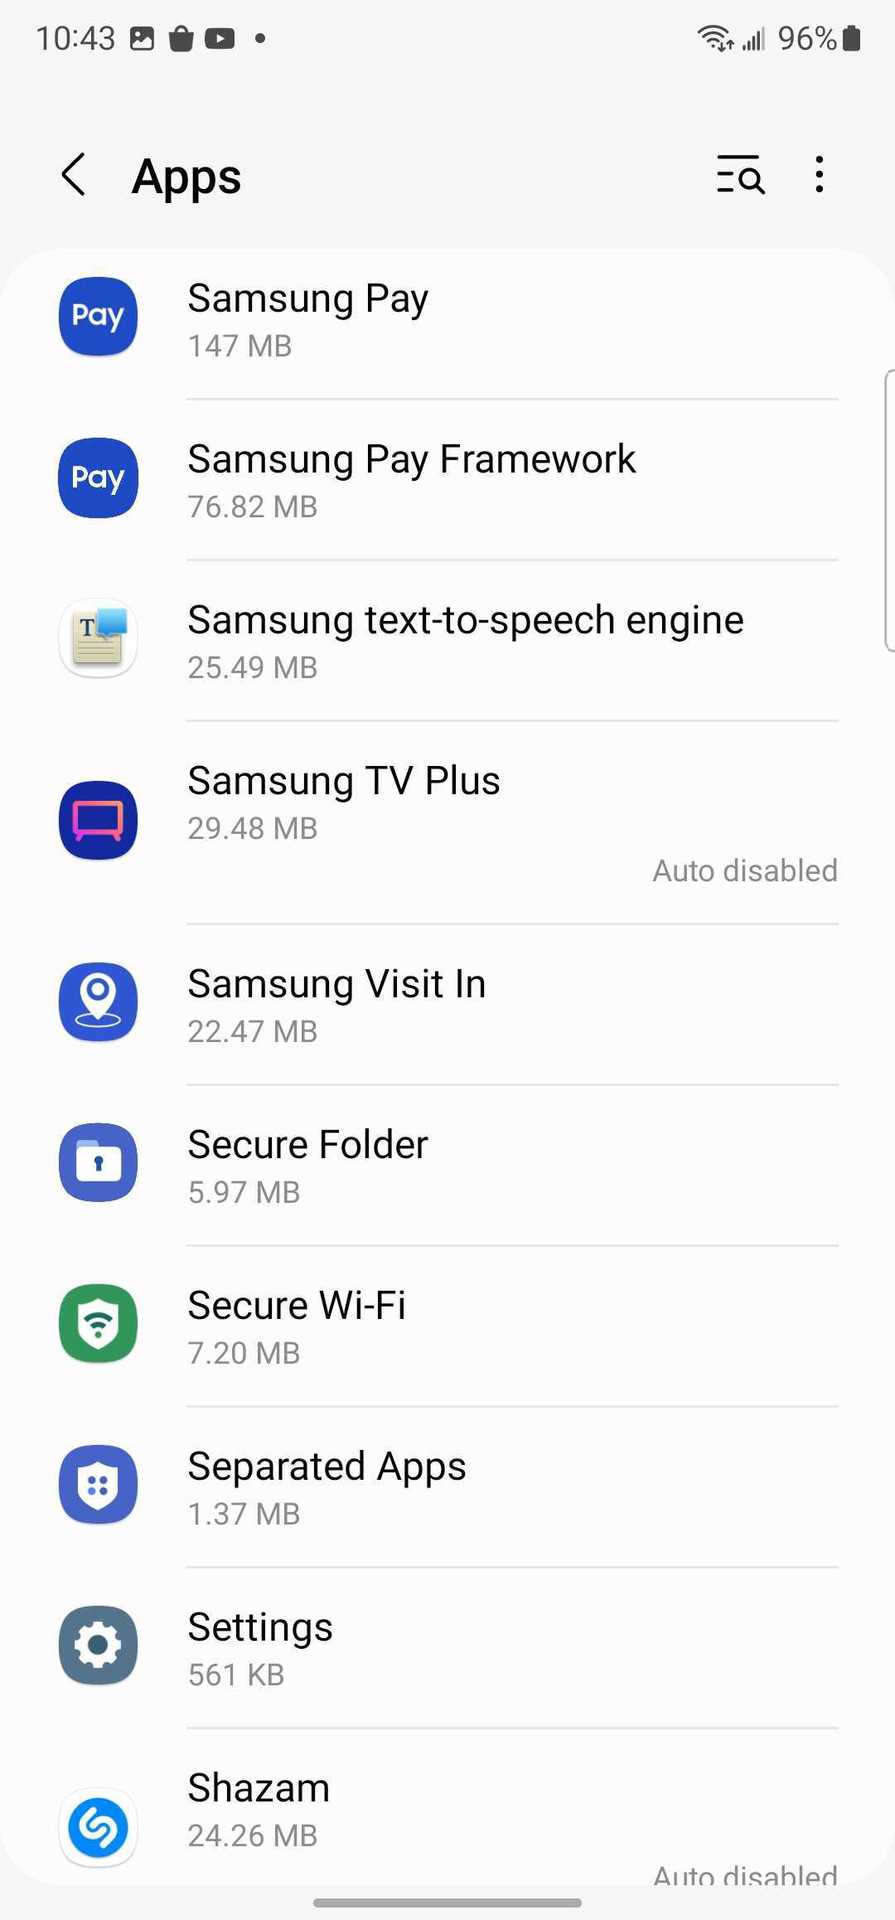 Samsung Pay settings for turning off ads 1